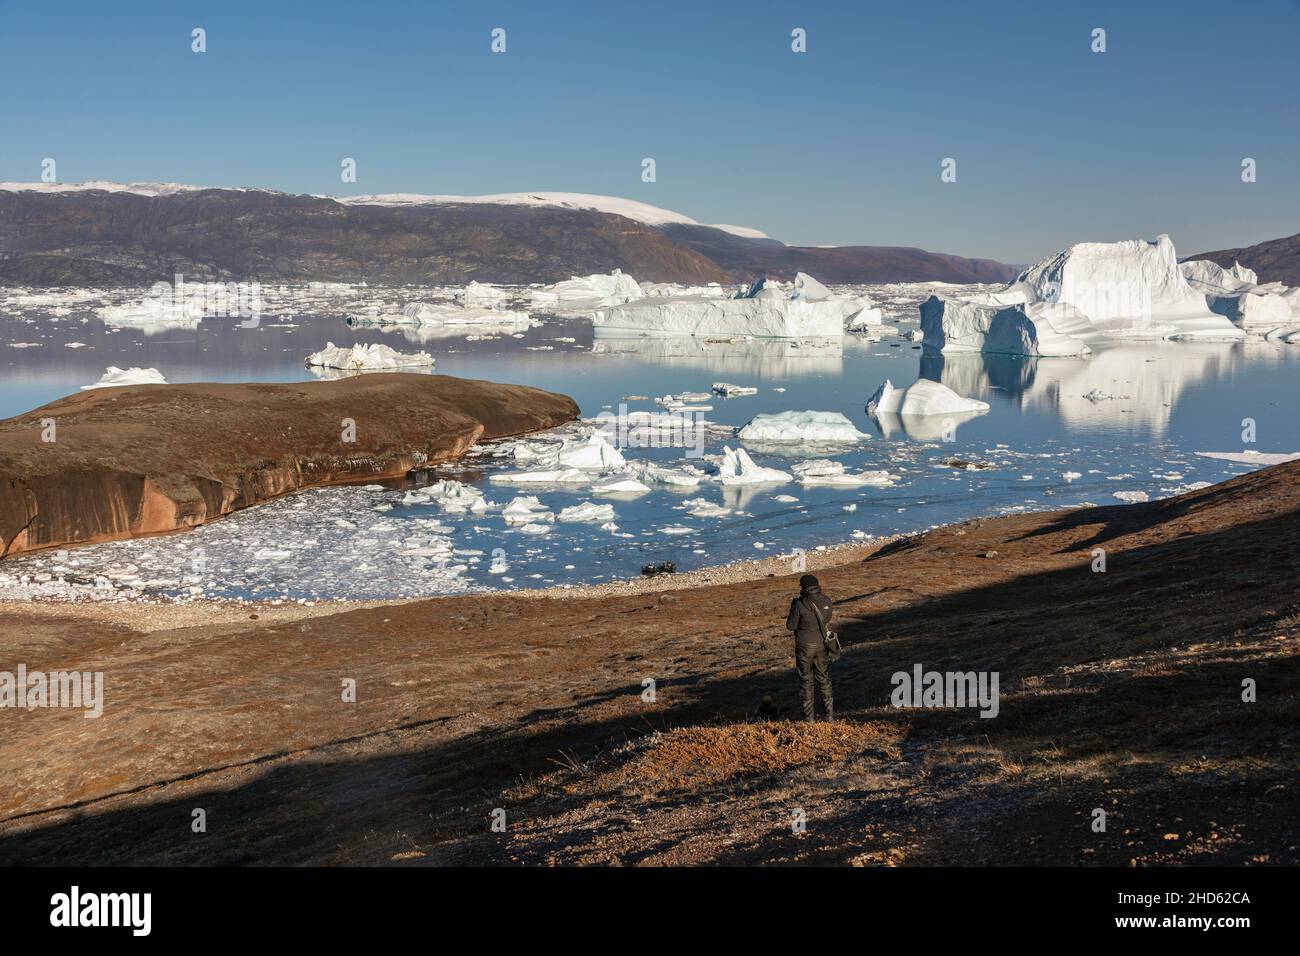 Photographer on Rode O looking down towards the Rodefjord beach with zodiacs and icebergs, Scoresby Sund, Greenland Stock Photo